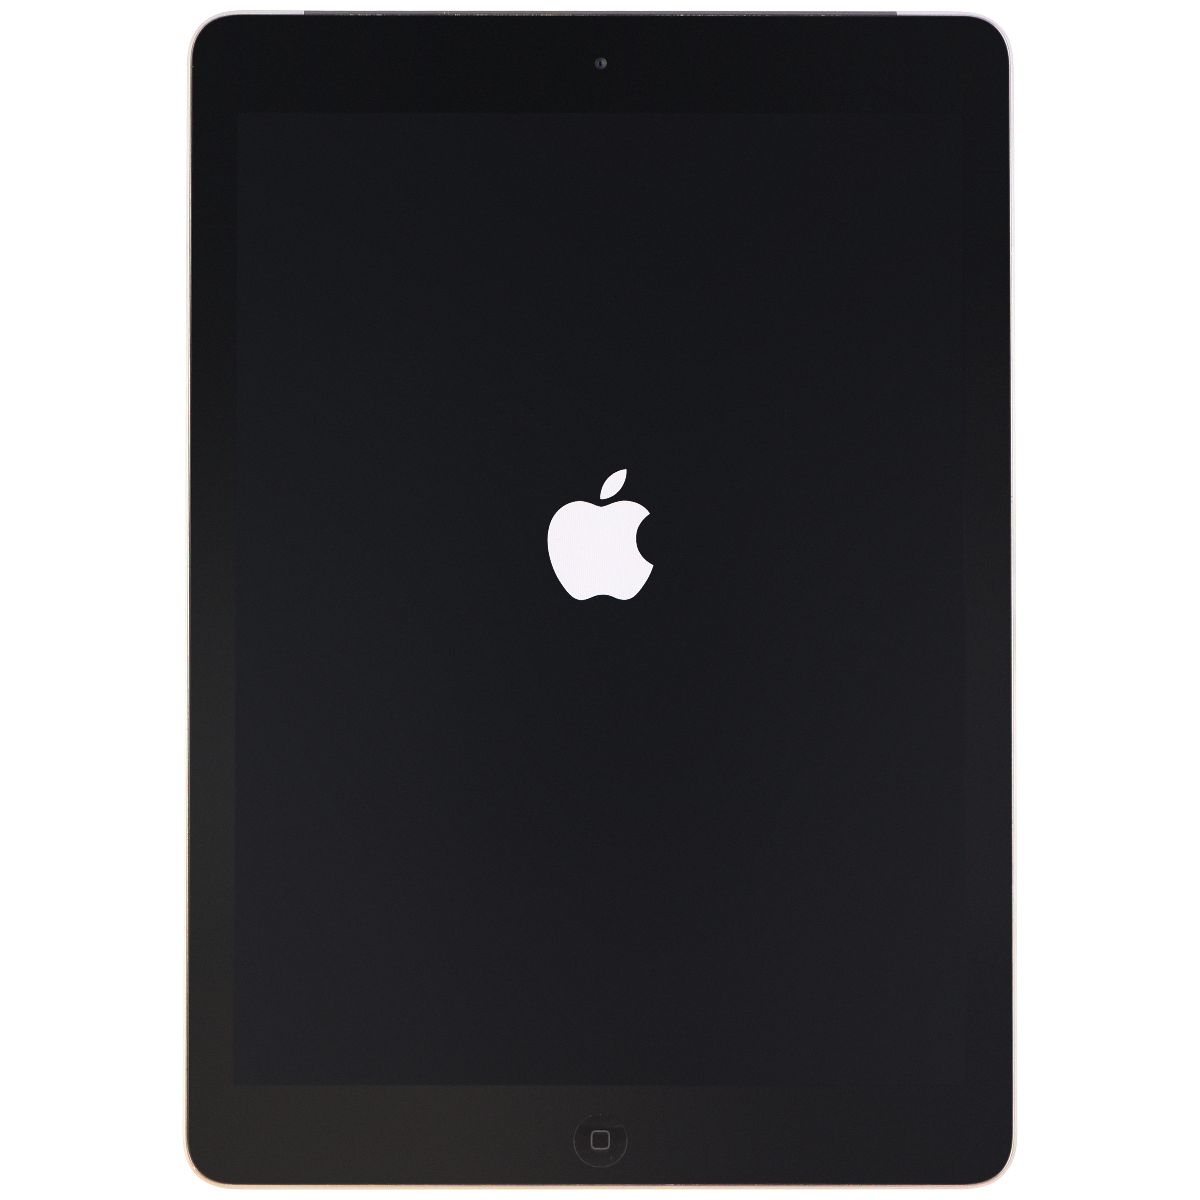 Apple iPad Air (1st Gen) 9.7-inch Tablet (A1475) Unlocked - 32GB / Space Gray iPads, Tablets & eBook Readers Apple    - Simple Cell Bulk Wholesale Pricing - USA Seller